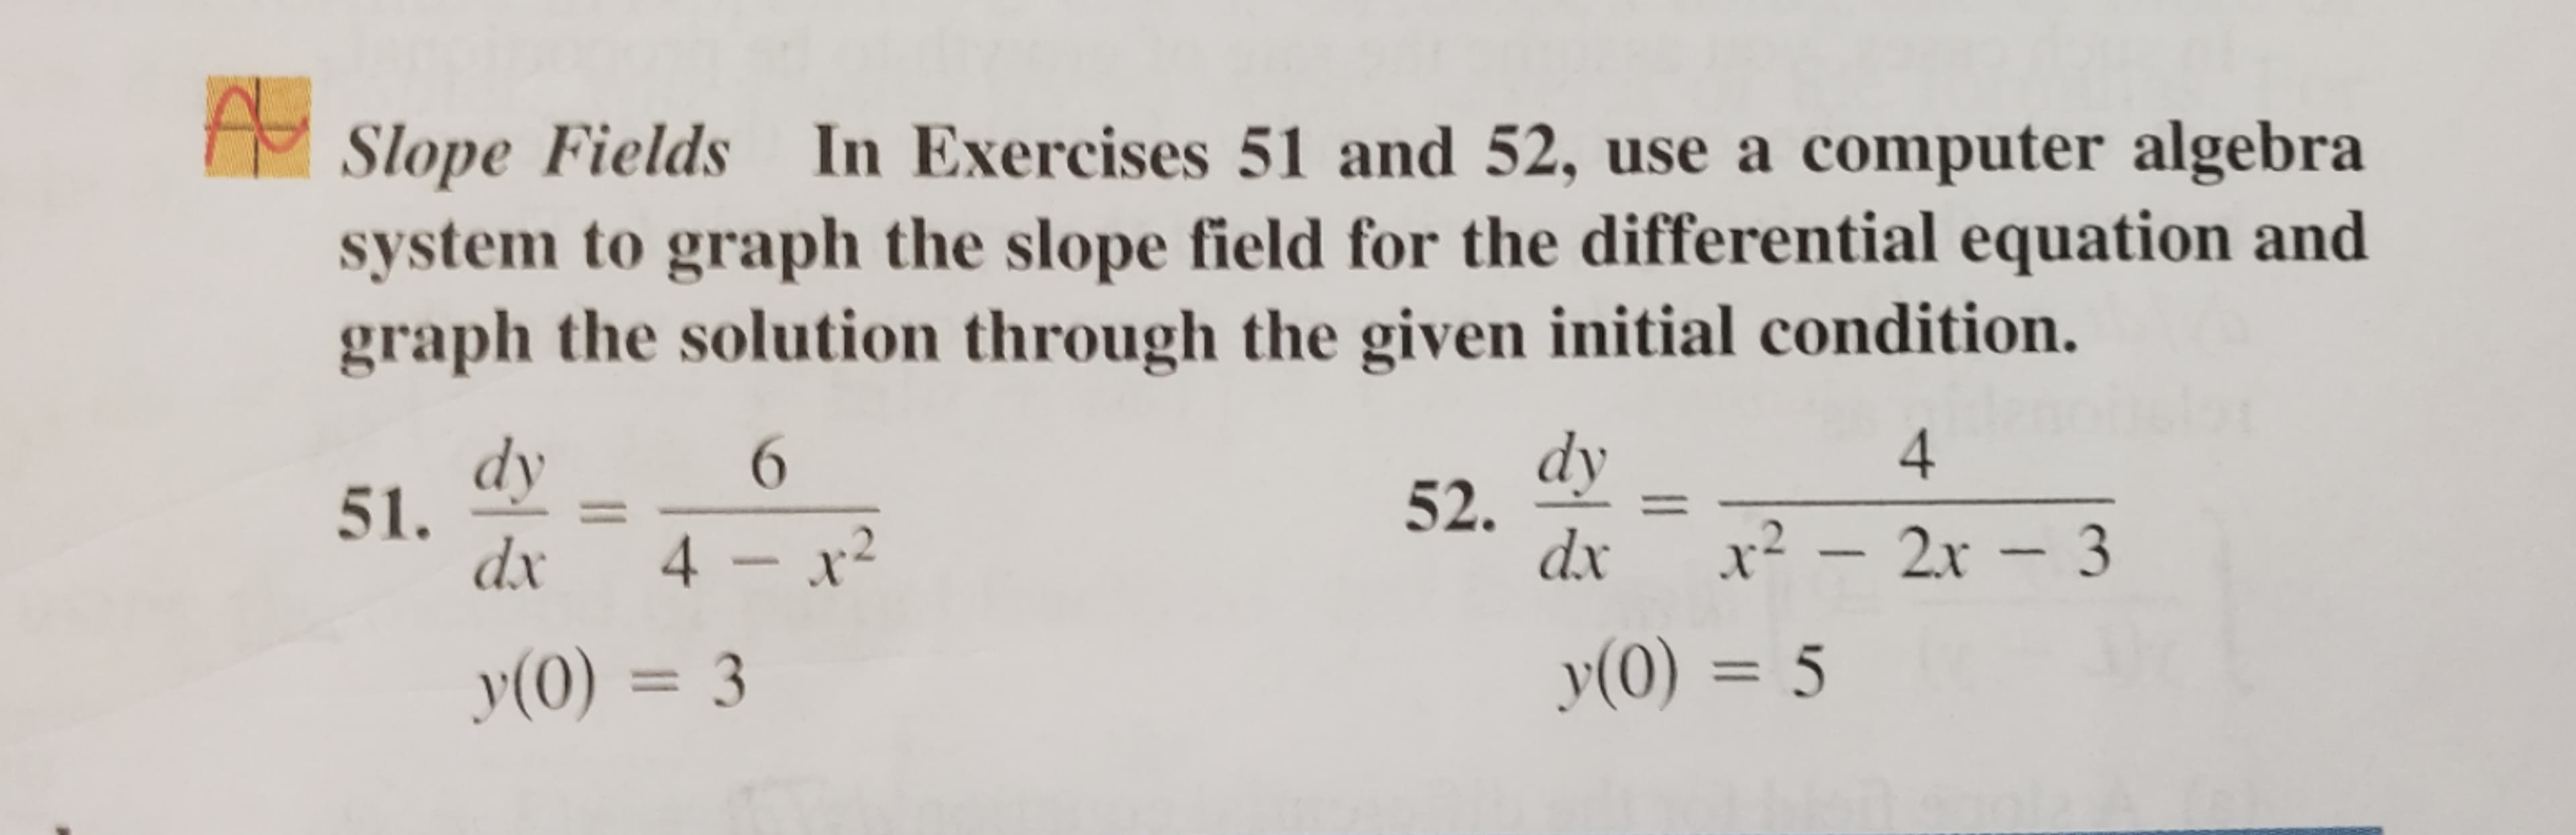 Sоре Fields
In Exercises 51 and 52, use a
co
01
algebra
system to graph the slope field for the differential equation and
graph the solution through the given initial condition.
4.
dy
51.
dx 4 - x
dy
52.
6
dx
x² – - 3
2.x
y(0) = 3
y(0) = 5
%3D
%3D
